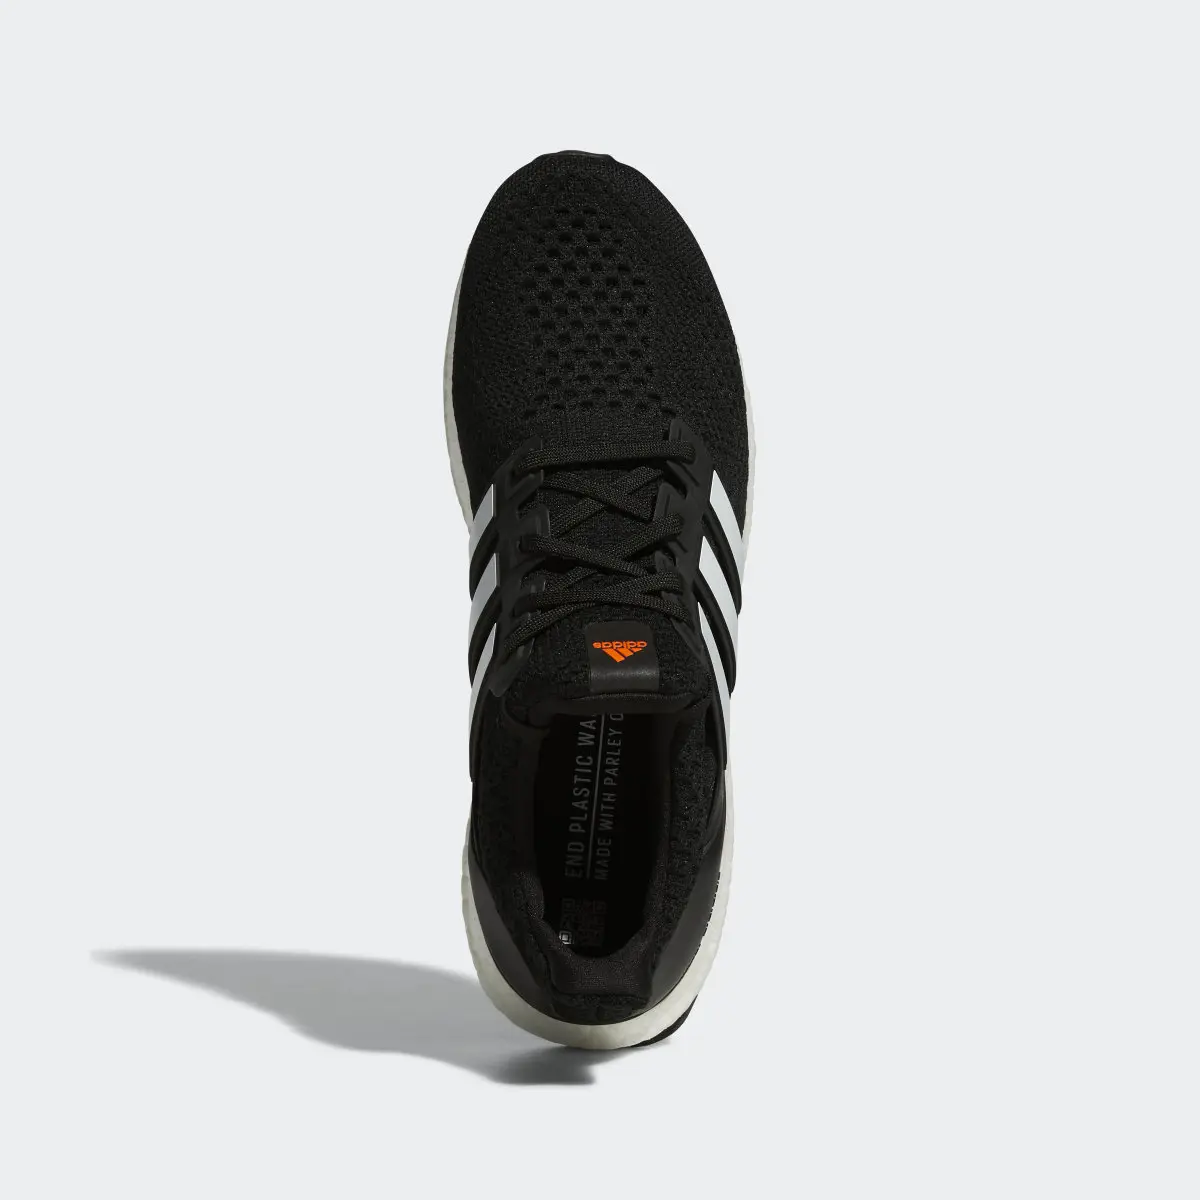 Adidas Ultraboost 5.0 DNA Shoes. 3